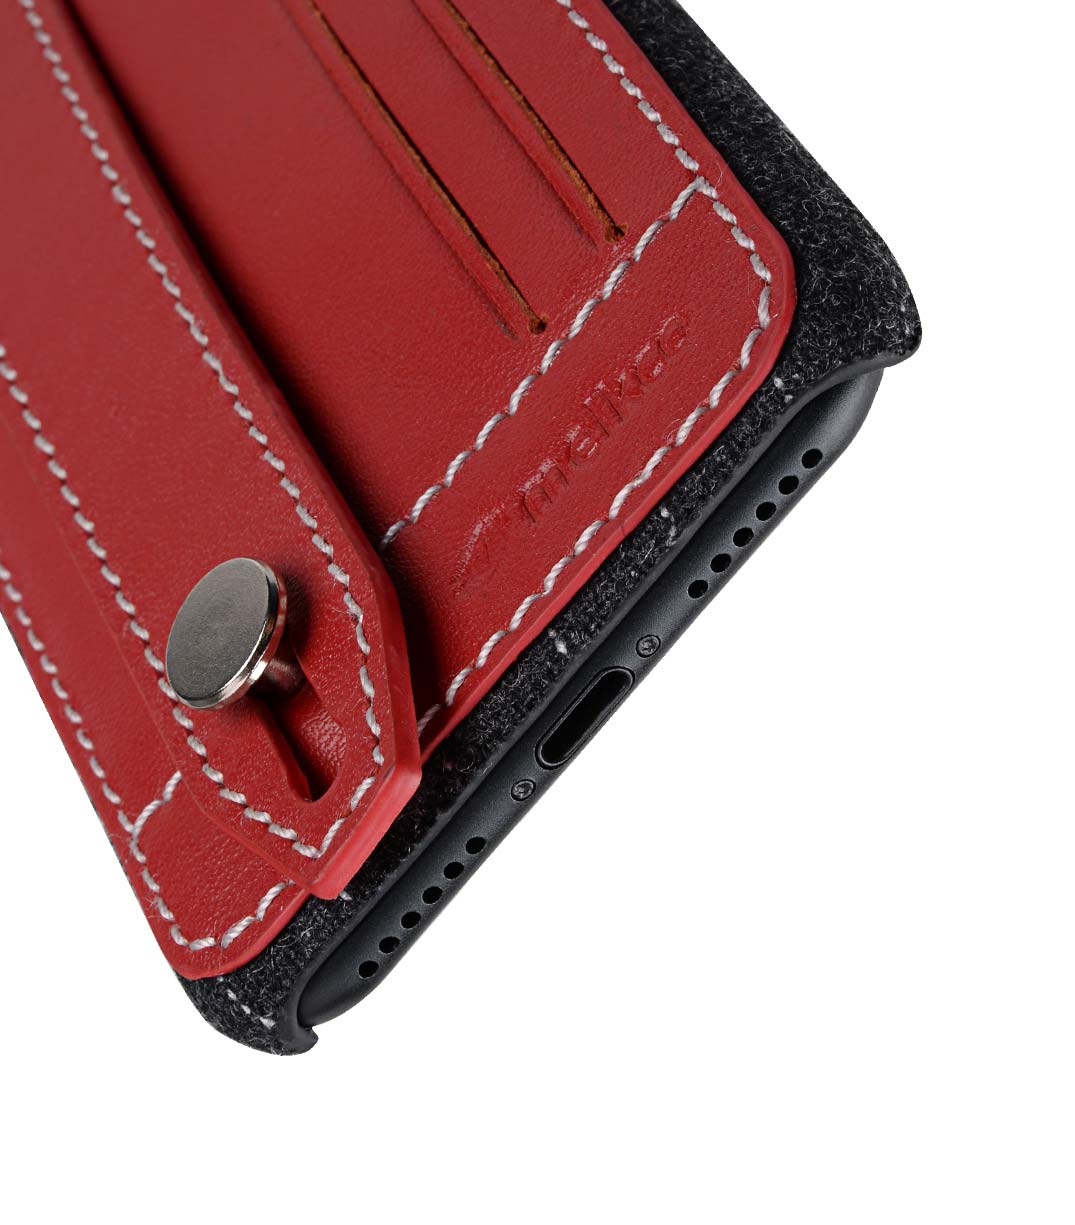 Melkco Holmes Series Heri Genuine Leather Dual Card slot with stand Case for Apple iPhone 7 / 8 (4.7") - (Red)